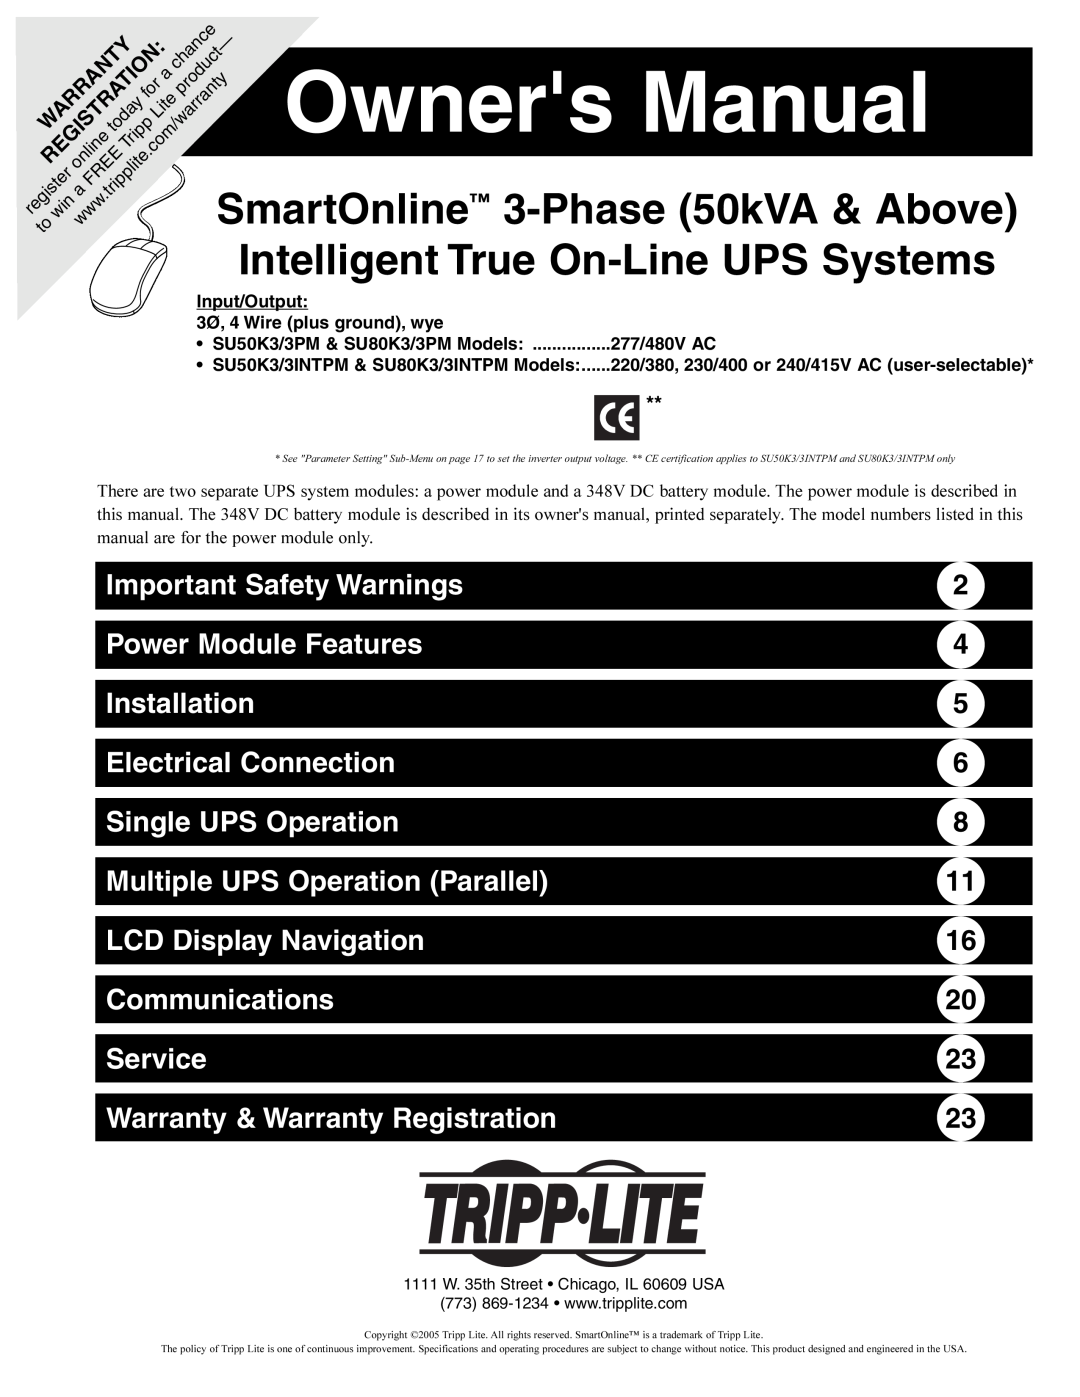 Tripp Lite SU80K3/3INTPM, SU80K3/3PM, SU50K3/3INTPM, SU50K3/3PM owner manual Owners Manual, SmartOnline, Phase 50kVA & Above 